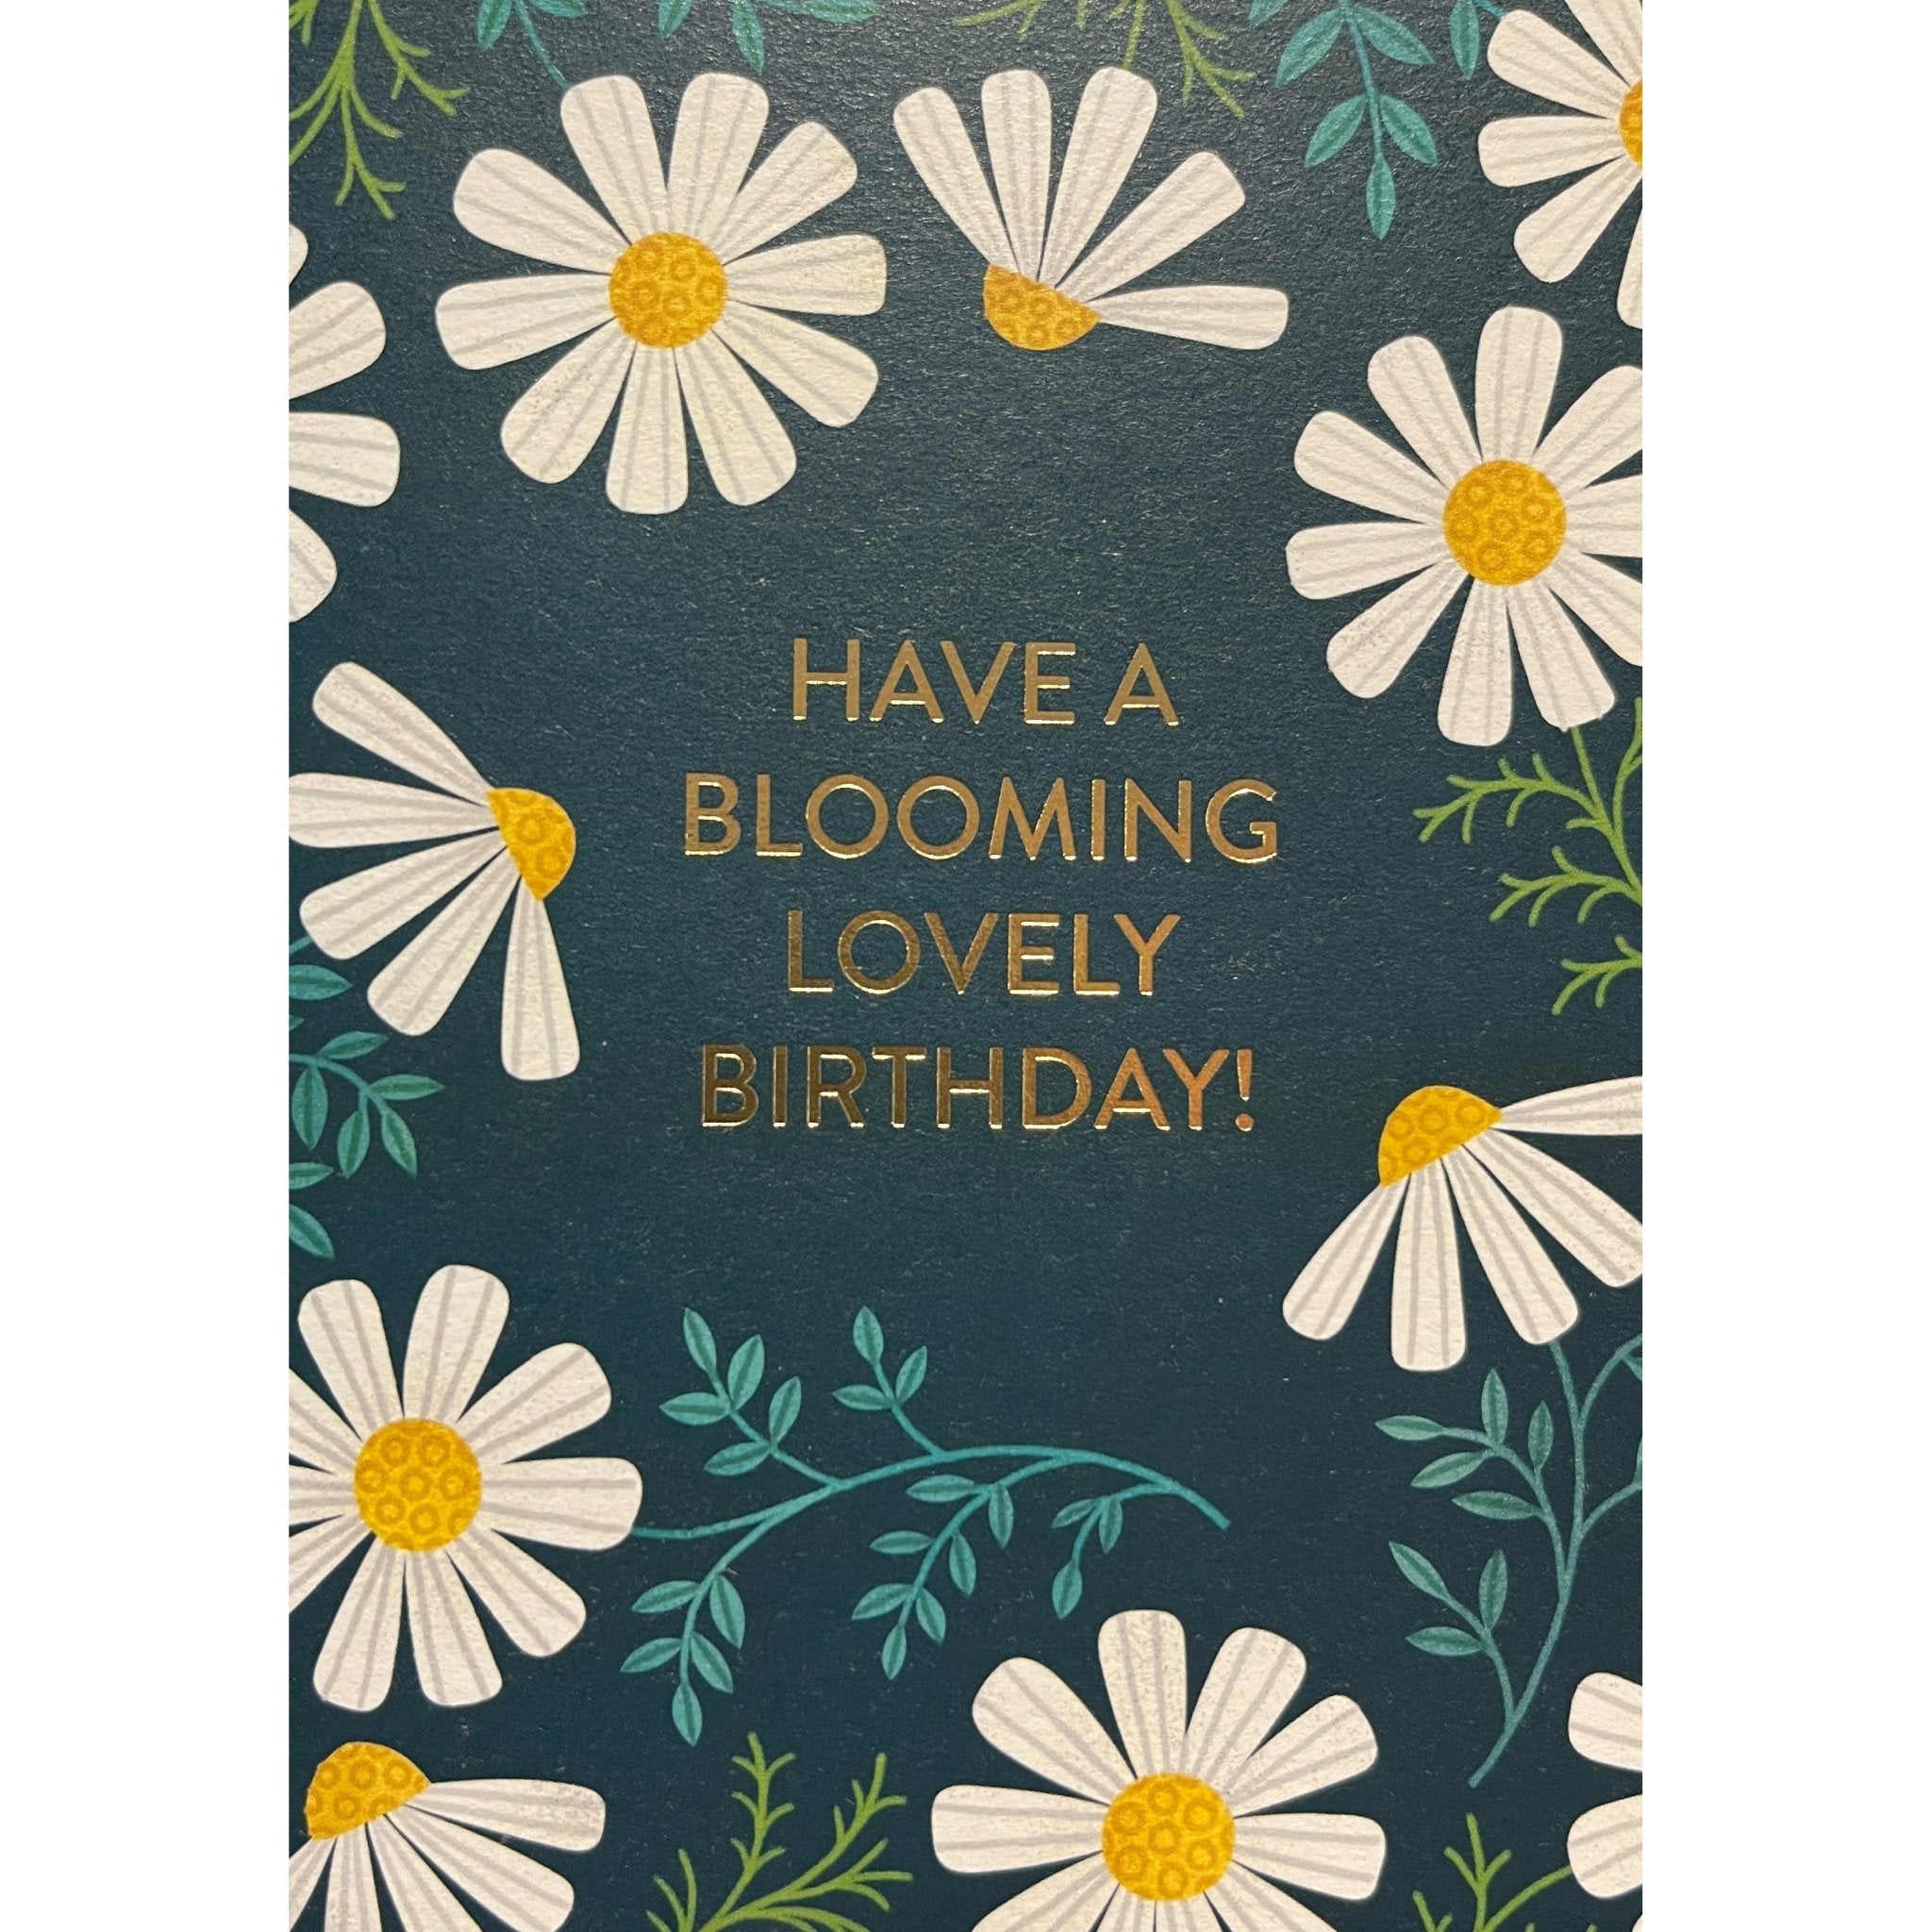 Blooming Marvellous Friend Birthday Card -  Canada